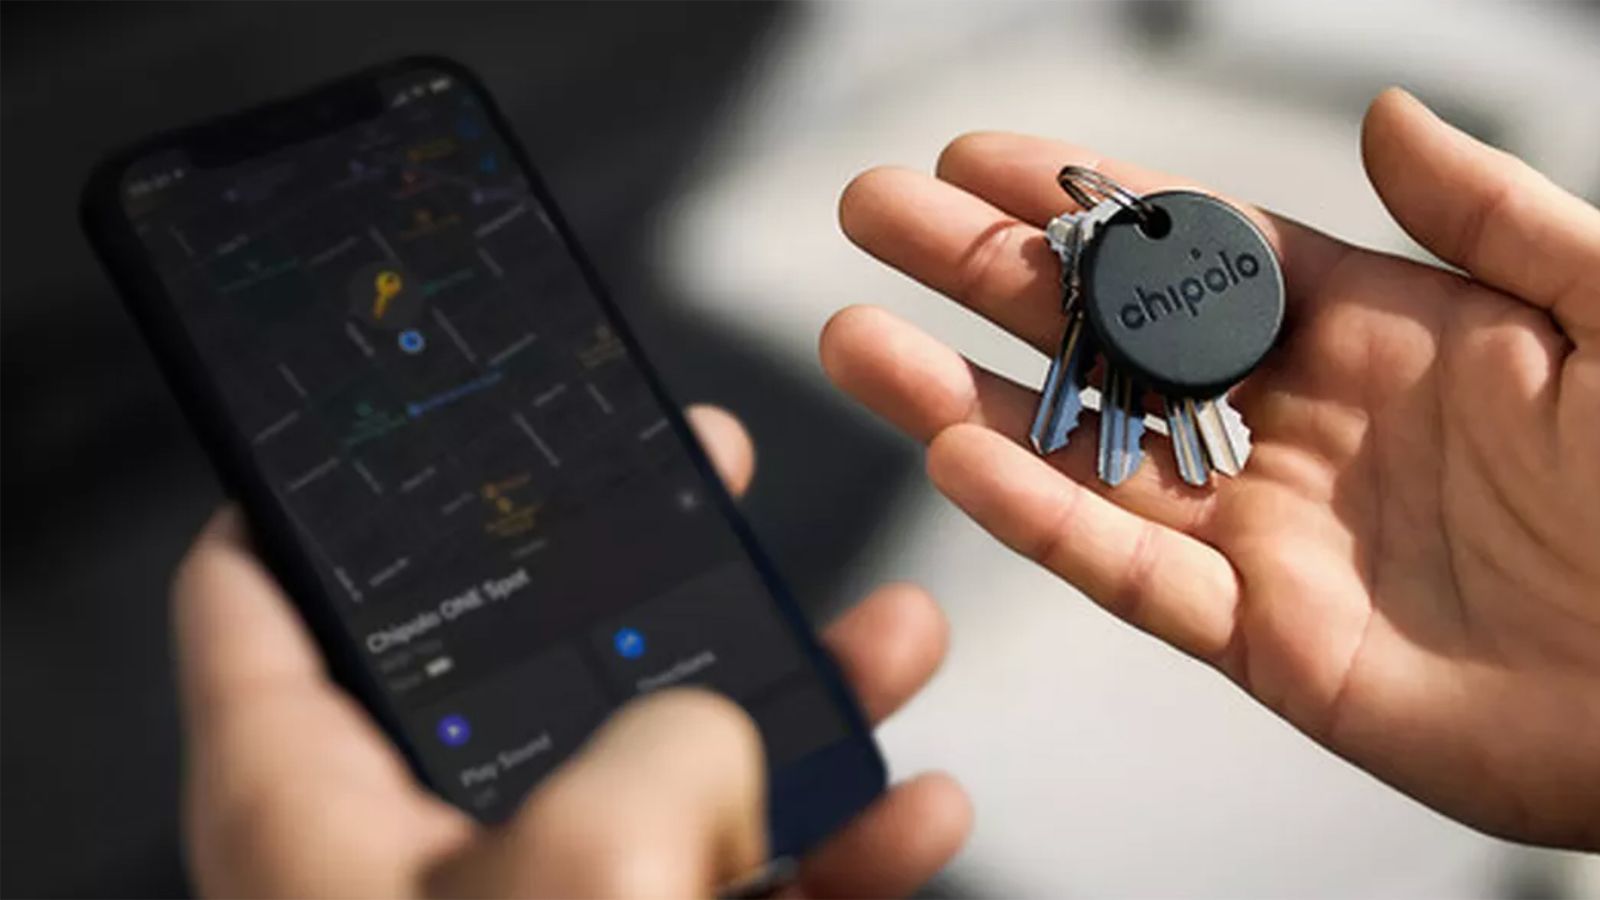 This new Chipolo tracker is an Android AirTag for Google's Find My Device